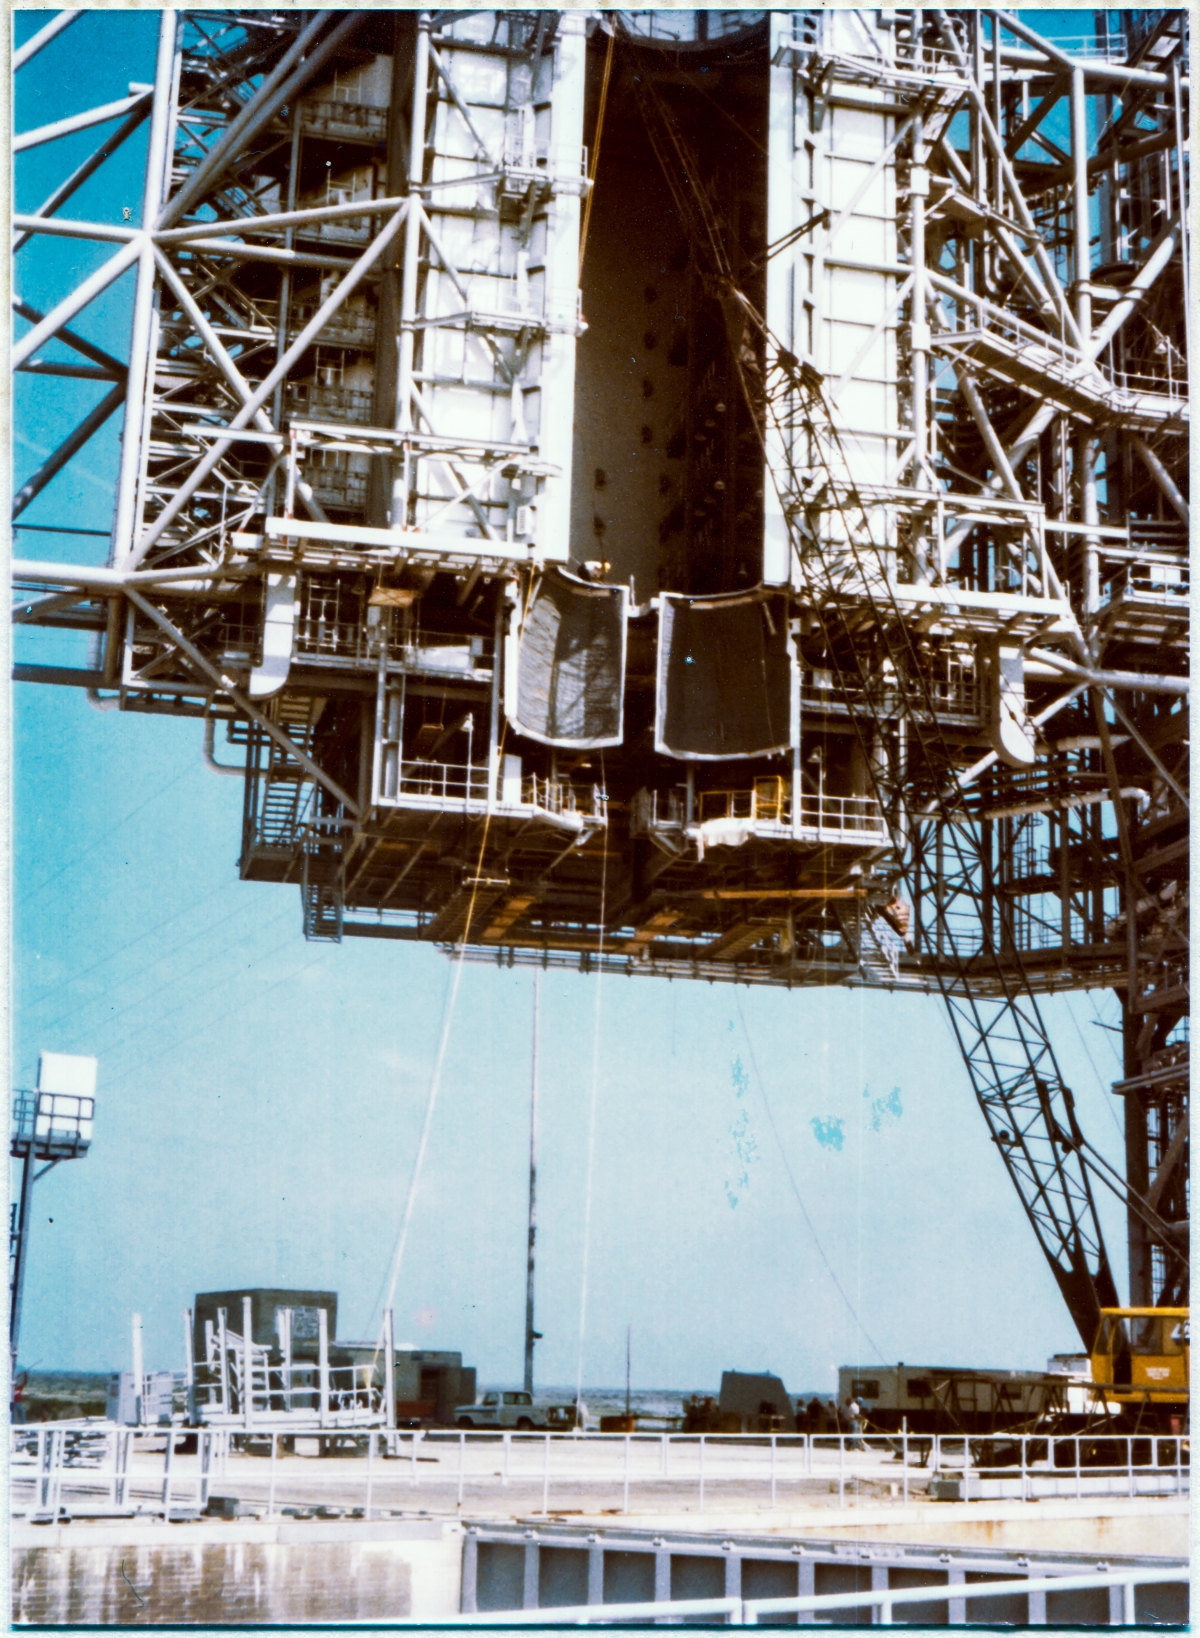 Image 069. The Rotating Service Structure at Space Shuttle Launch Complex 39-B, Kennedy Space Center, Florida, shortly after the new OMS Pod Heated Purge Covers had been installed, showing preparatory work for the installation of the ARCS Rooms underway, in addition to no end of other unseen preparations by Union Ironworkers from Local 808 for the huge grab bag of removals, modifications, and additions on both the RSS and the FSS which were encompassed by Engineering Drawing Package 79K24048. Photo by James MacLaren.